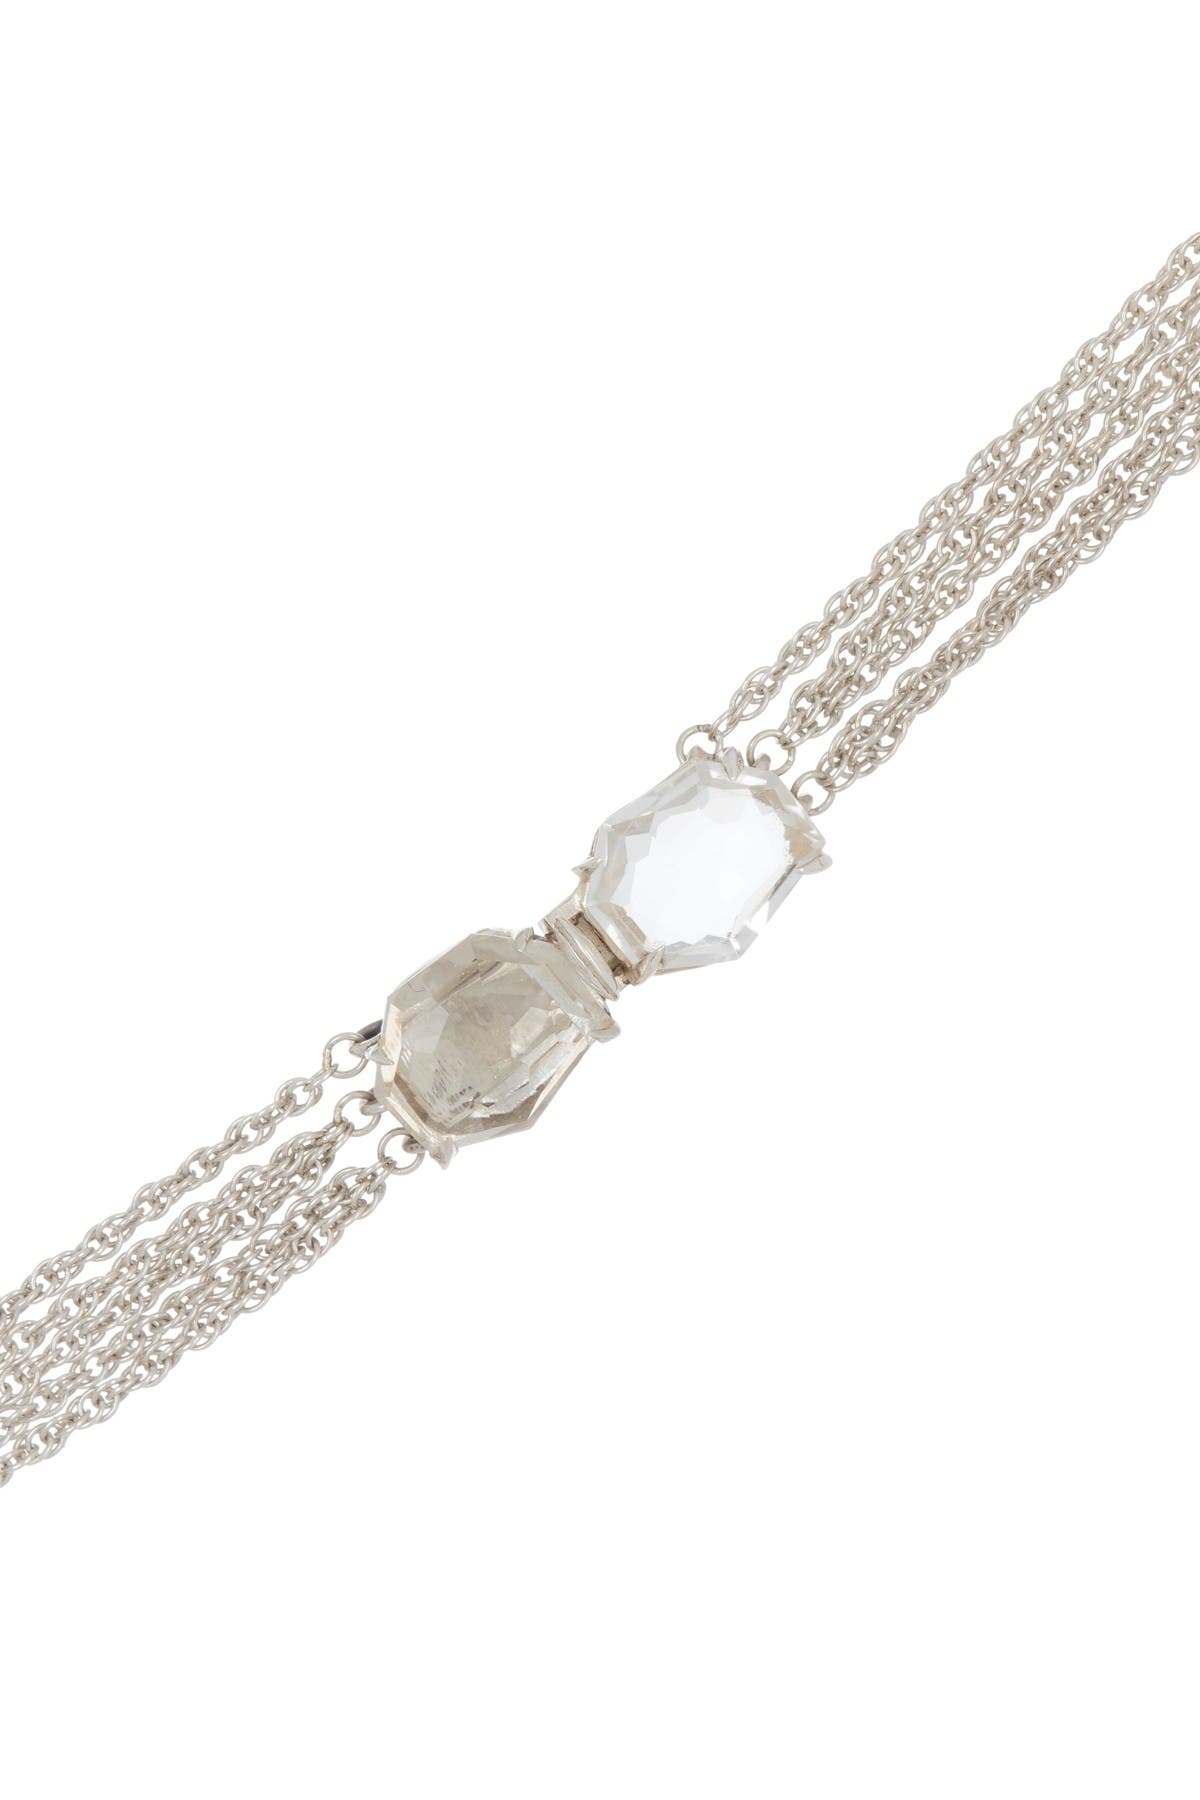 Alexis Bittar Sterling Silver Quartz With Diamond Cluster Bib Necklace In D0.92 Si2si1 Cq Gs Ss